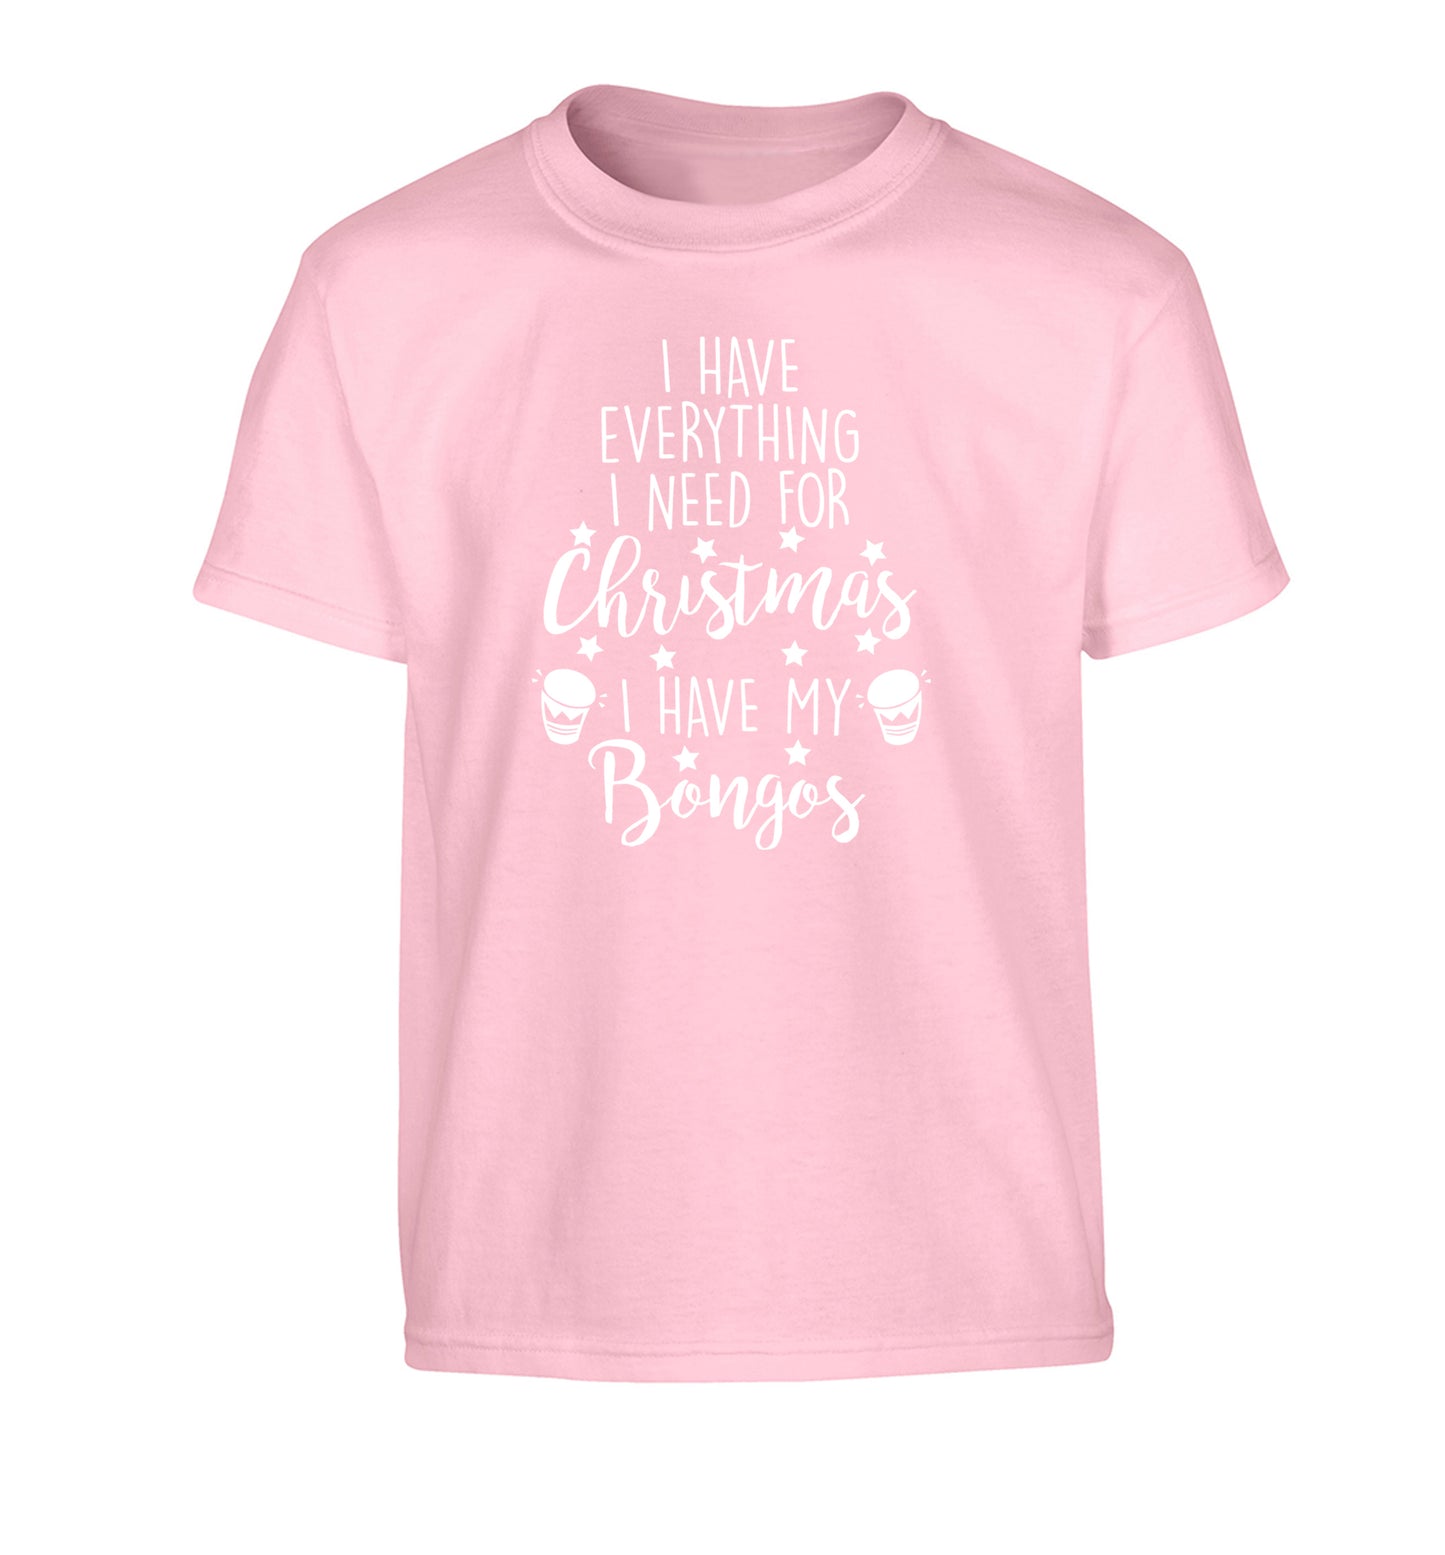 I have everything I need for Christmas I have my bongos! Children's light pink Tshirt 12-14 Years